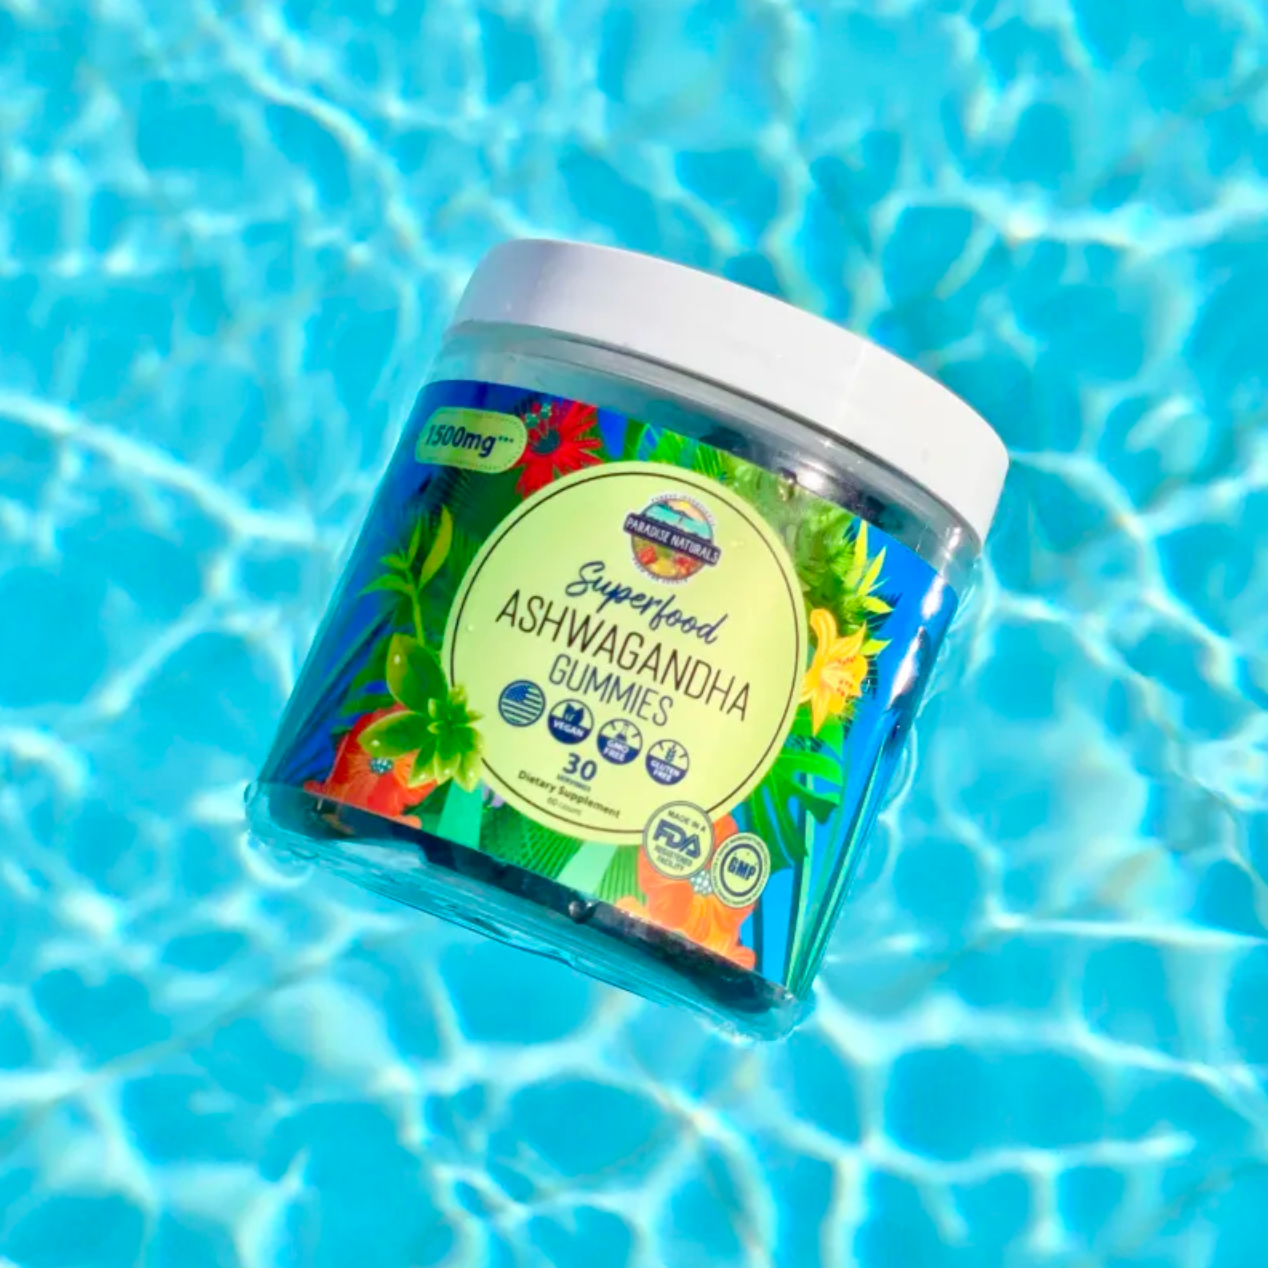 Paradise Naturals Launches ‘Relaxation In a Jar’: New Ashwagandha Gummies